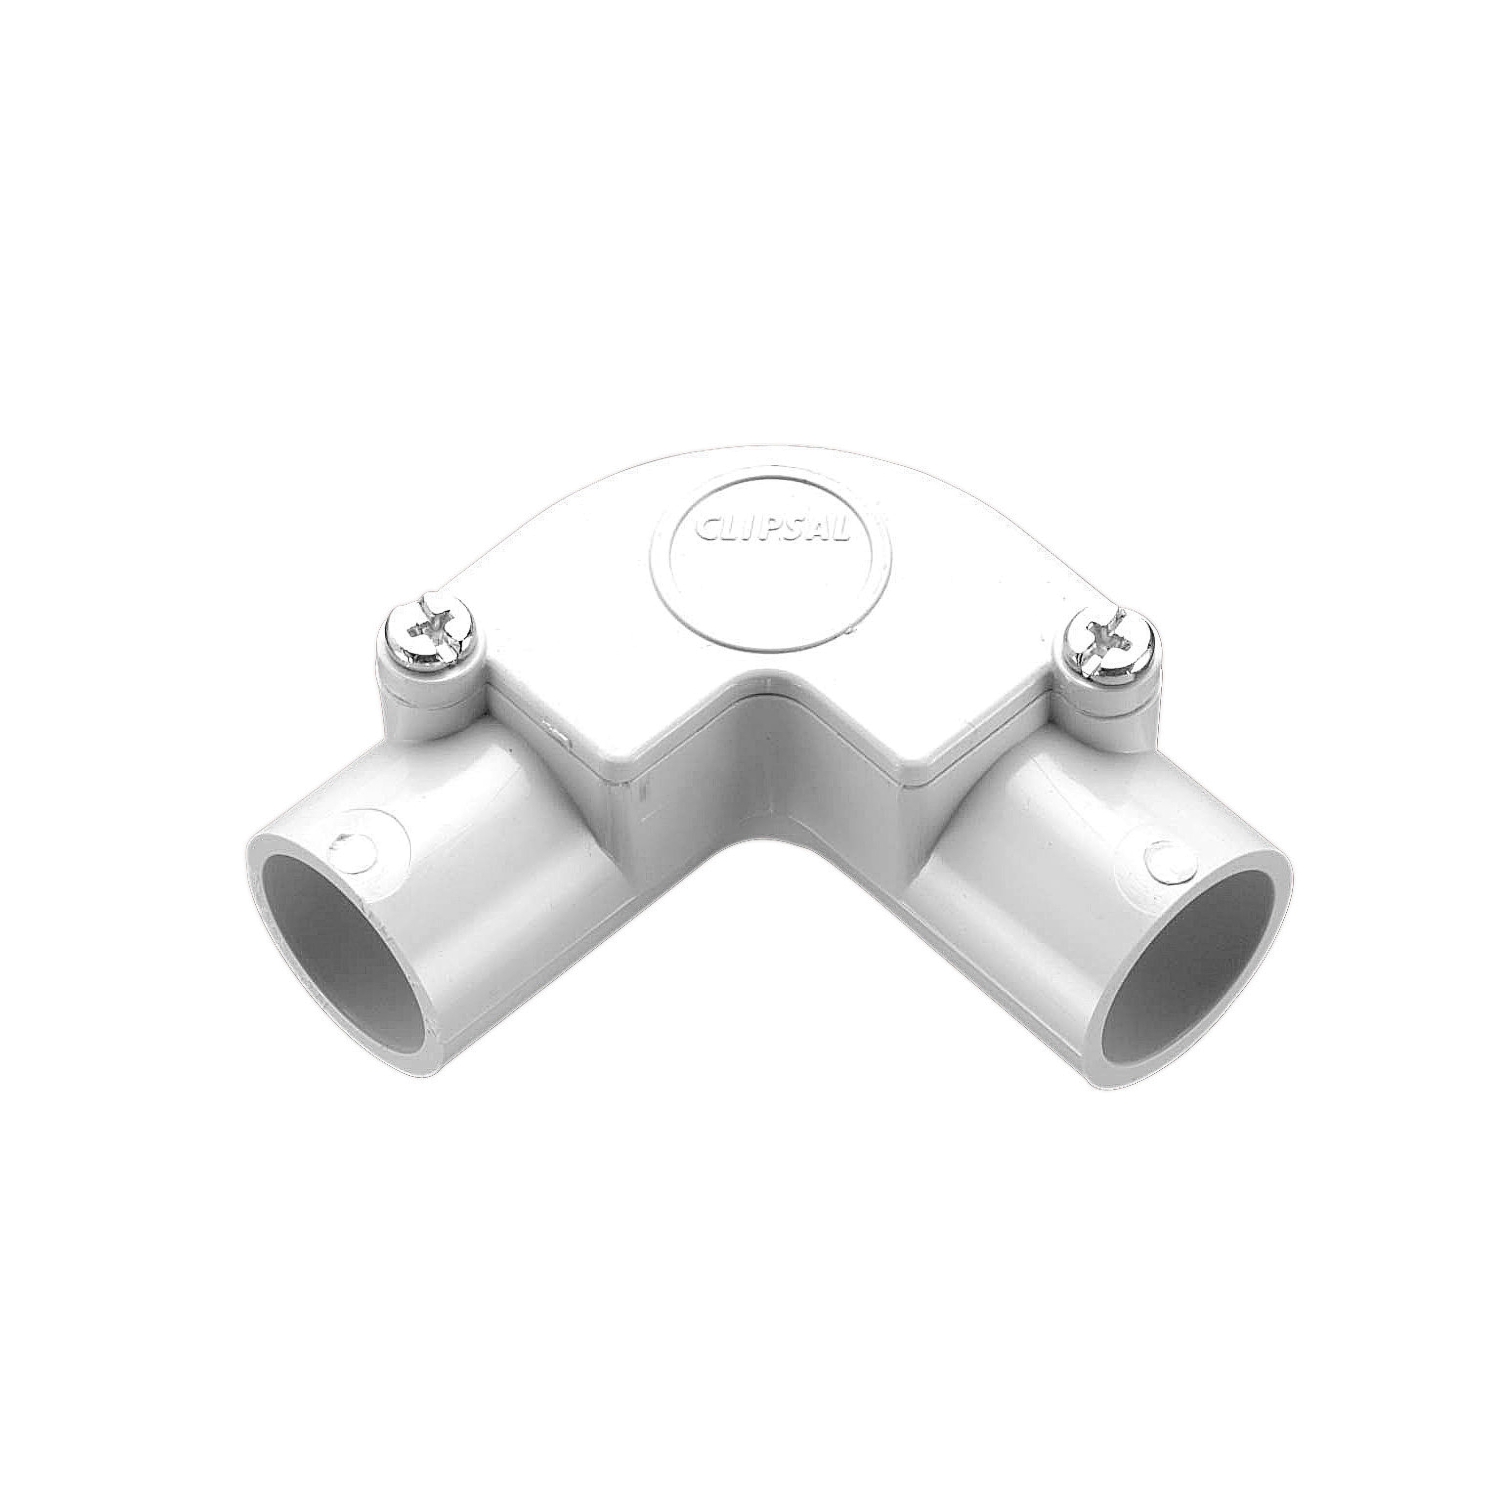 Inspection Fittings - PVC, Inspection Elbows, 20mm, Grey